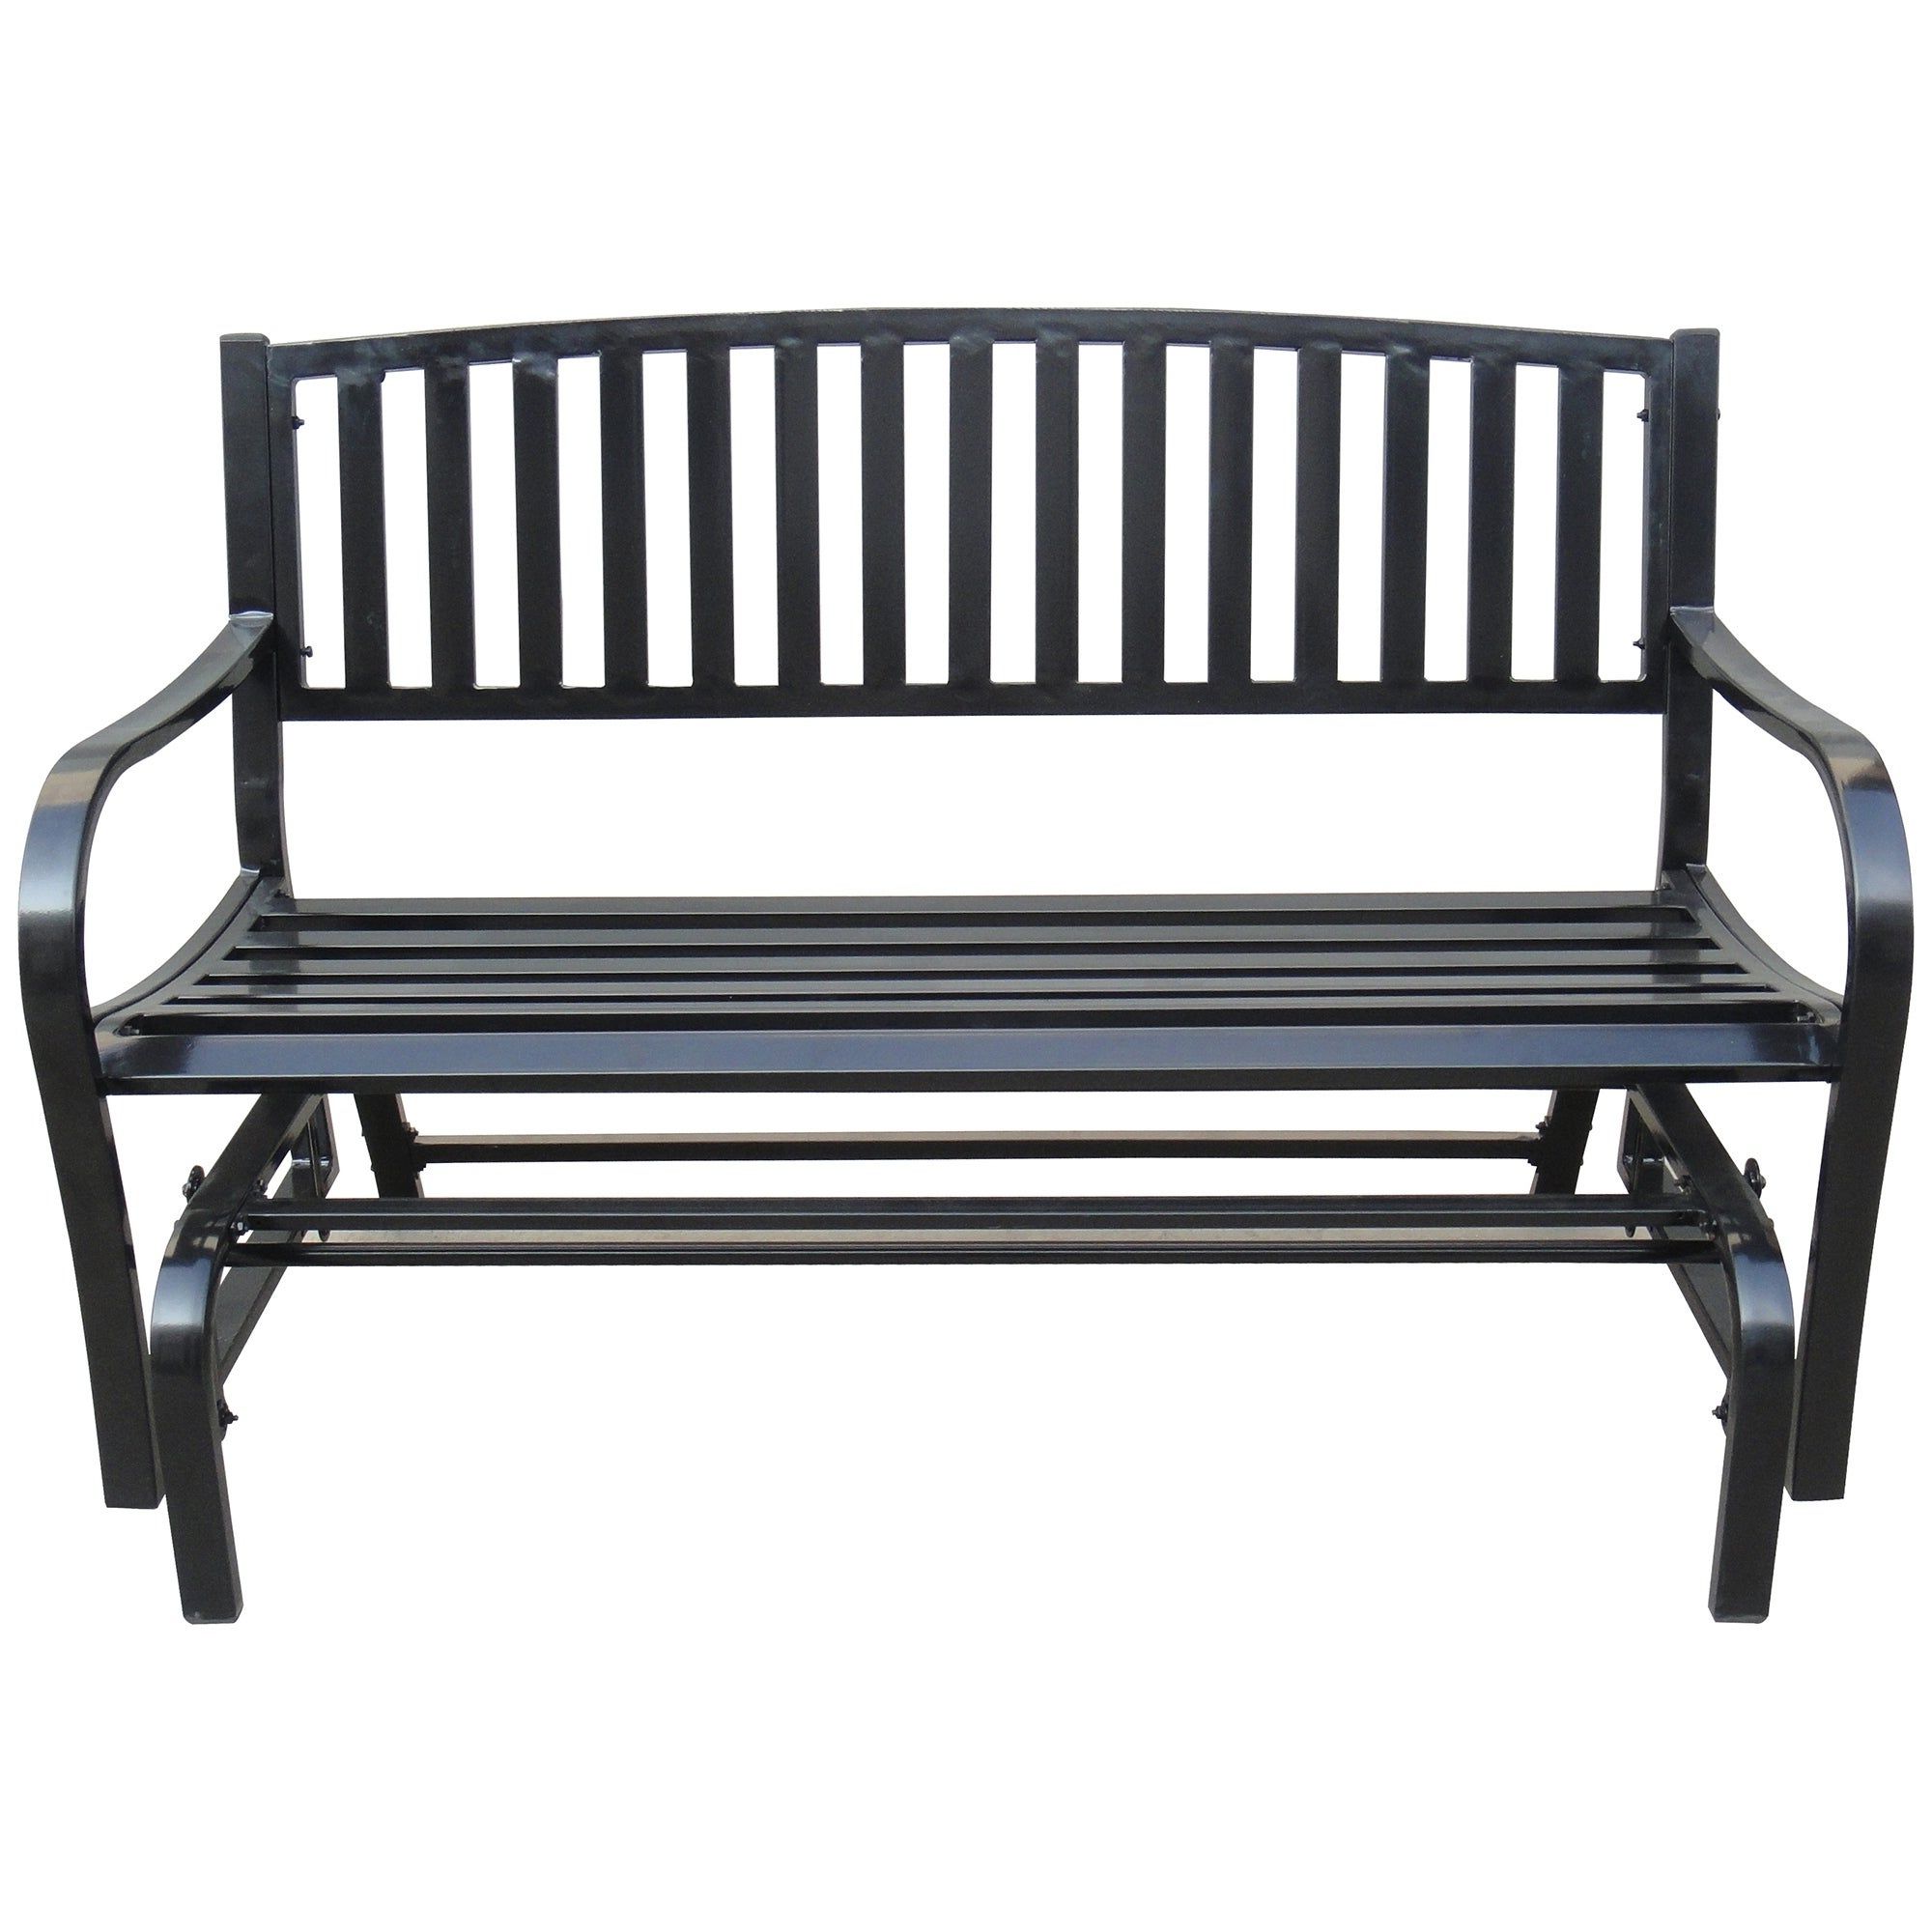 Maypex Double Seaters Steel Glider Bench Throughout Latest Outdoor Steel Patio Swing Glider Benches (View 11 of 25)